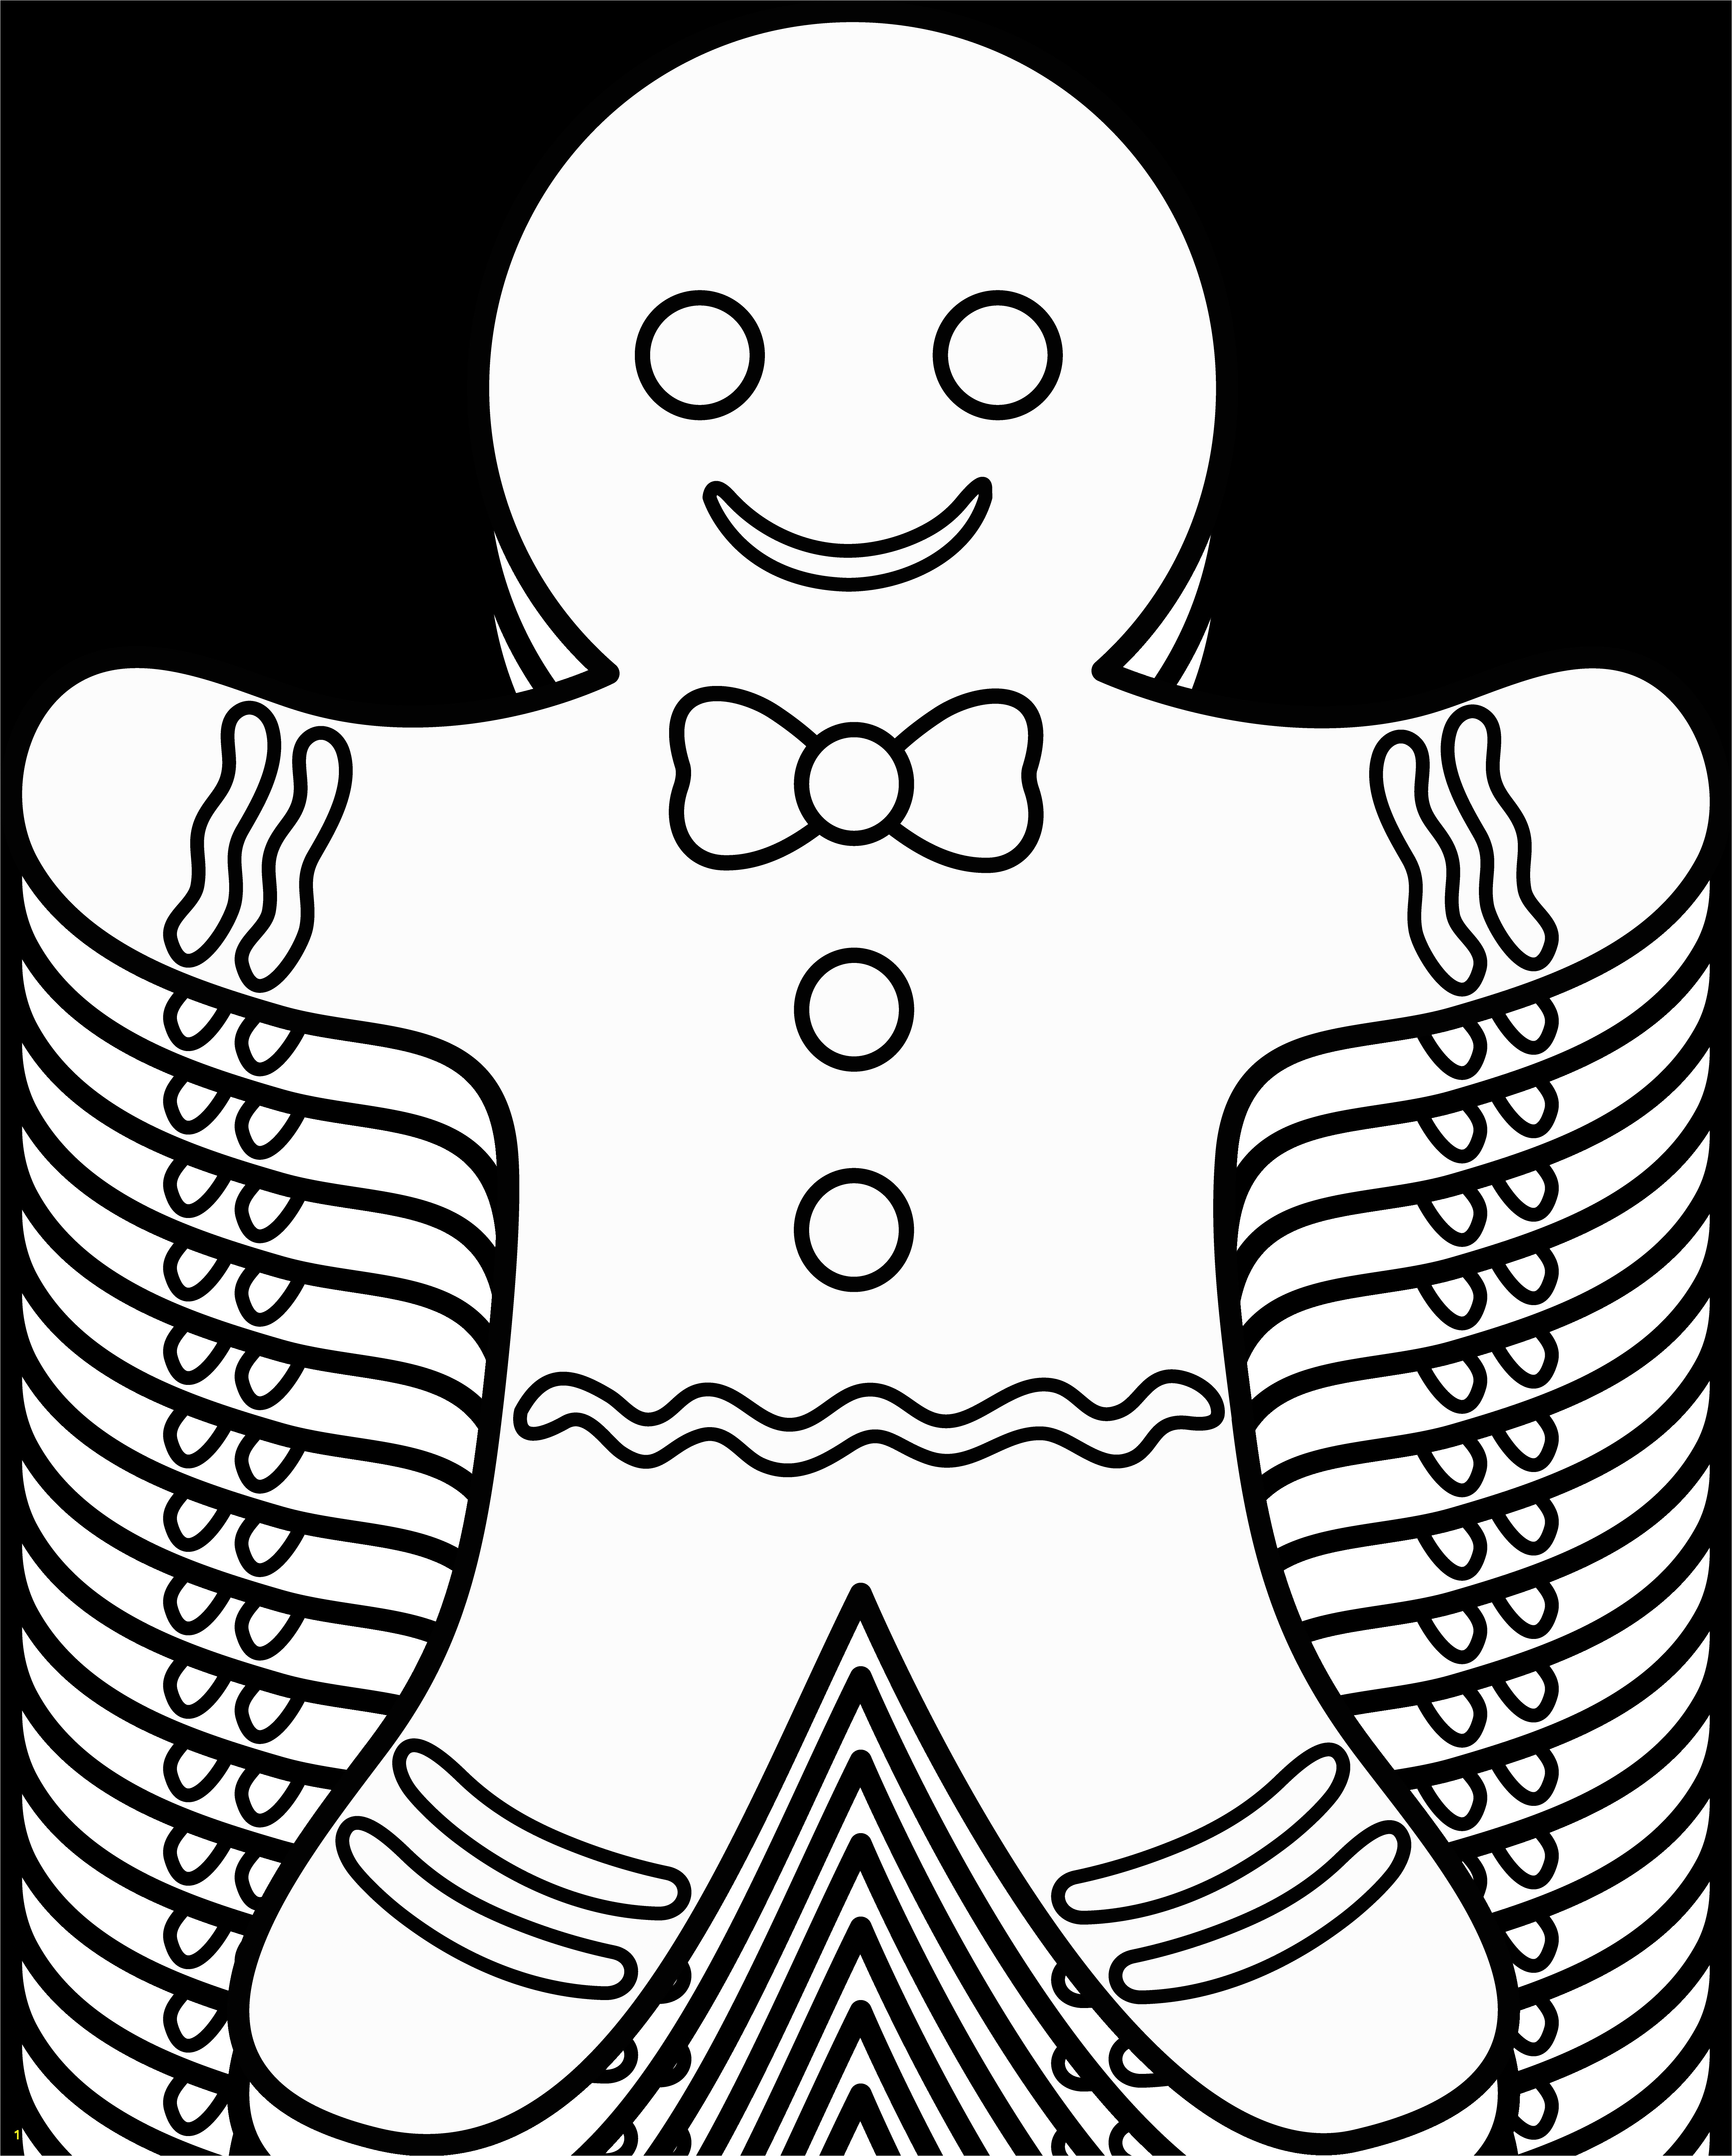 Christmas Lights Coloring Page this would be fun to color Description from pinterest